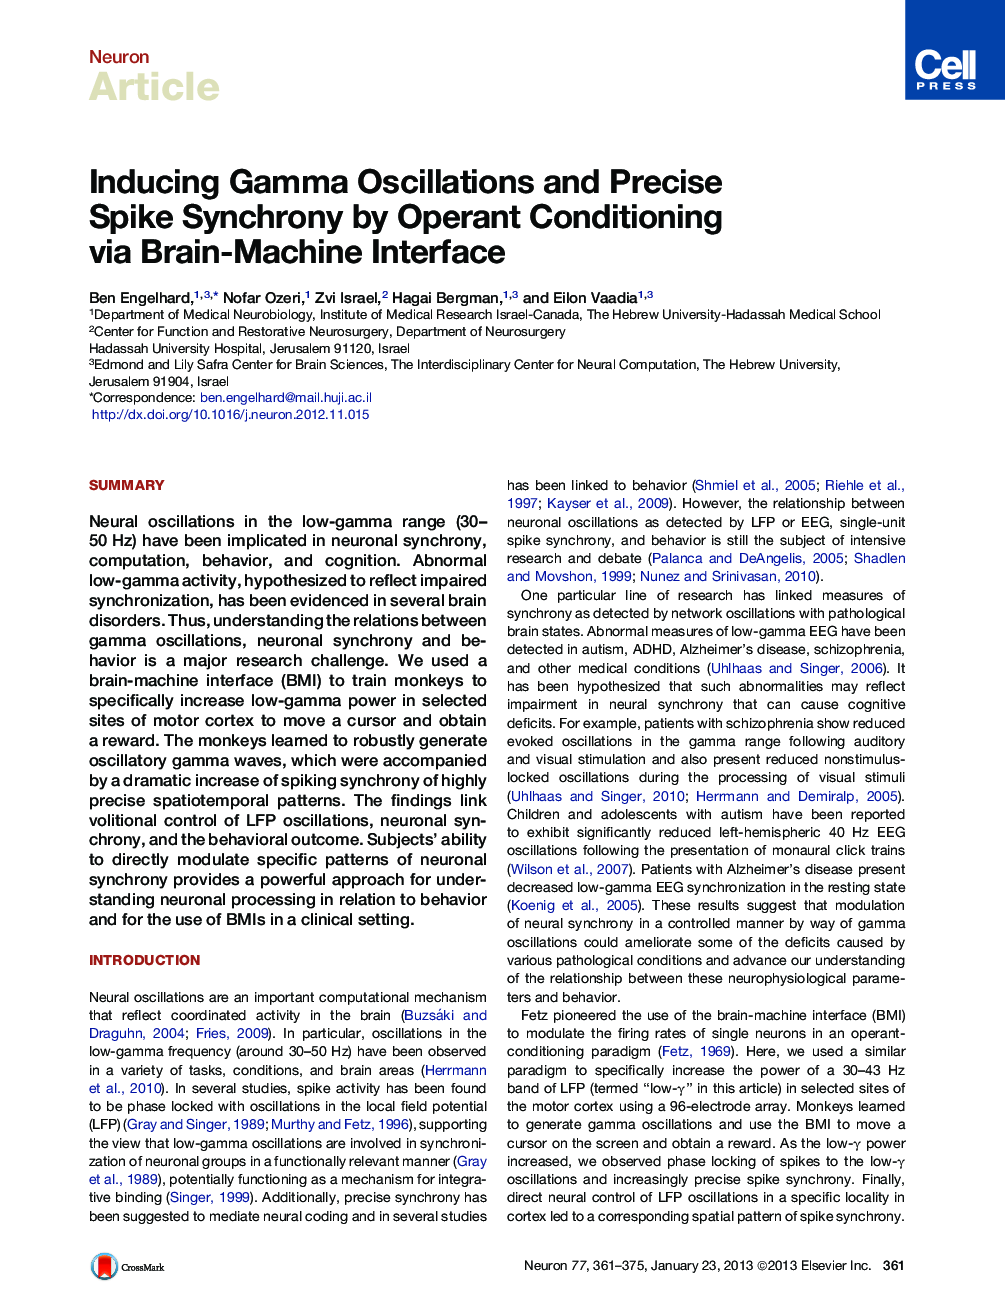 Inducing Gamma Oscillations and Precise Spike Synchrony by Operant Conditioning via Brain-Machine Interface